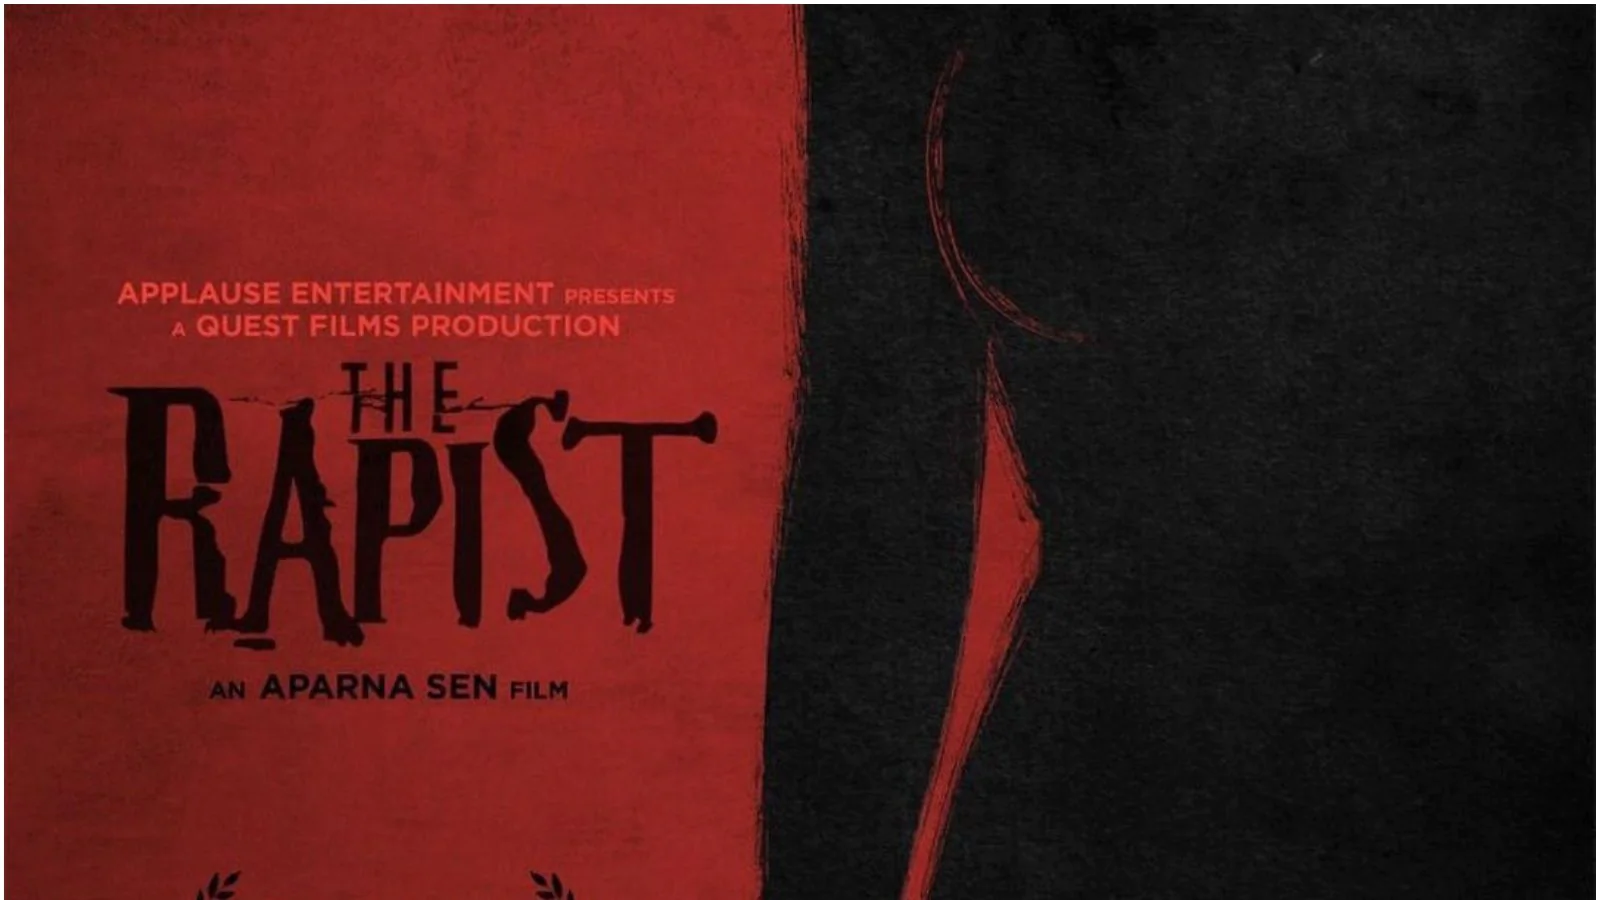 Poignant portrayal of sexual assault in Indian cinema